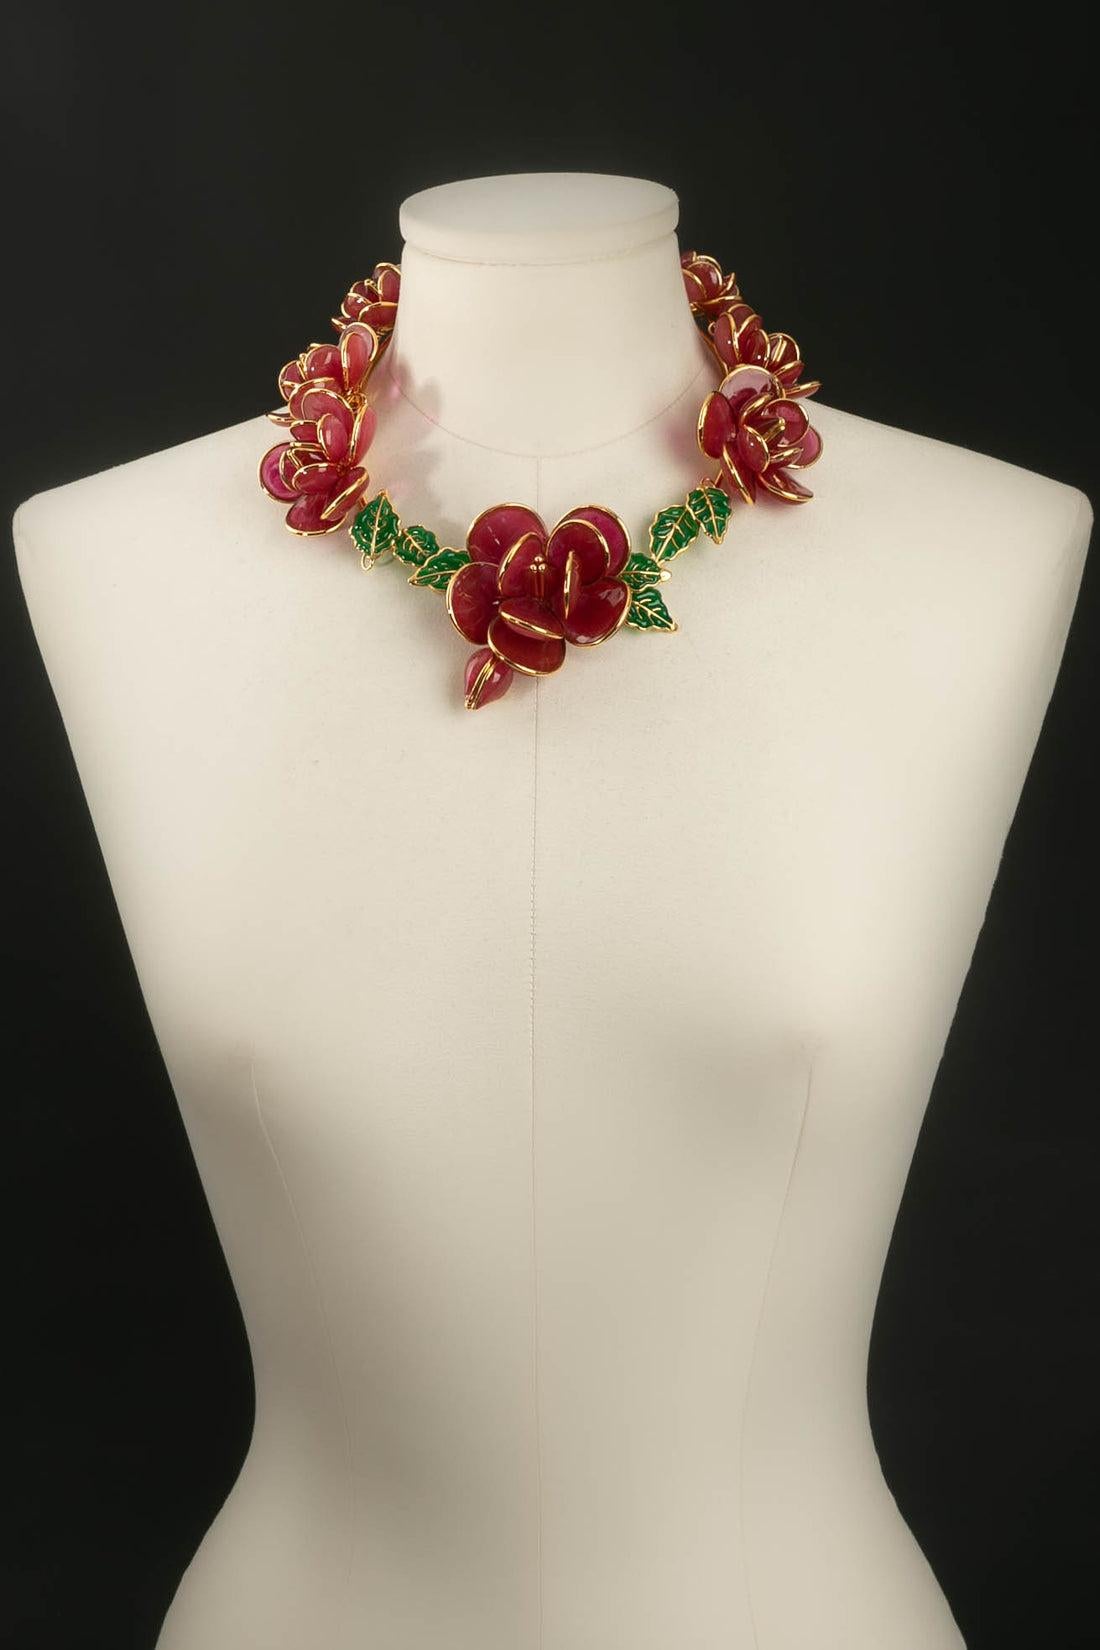 Augustine : Short gilded metal necklace with red glass paste flowers.

Additional information: 
Dimensions: Length: 42 cm to 48 cm (16.53